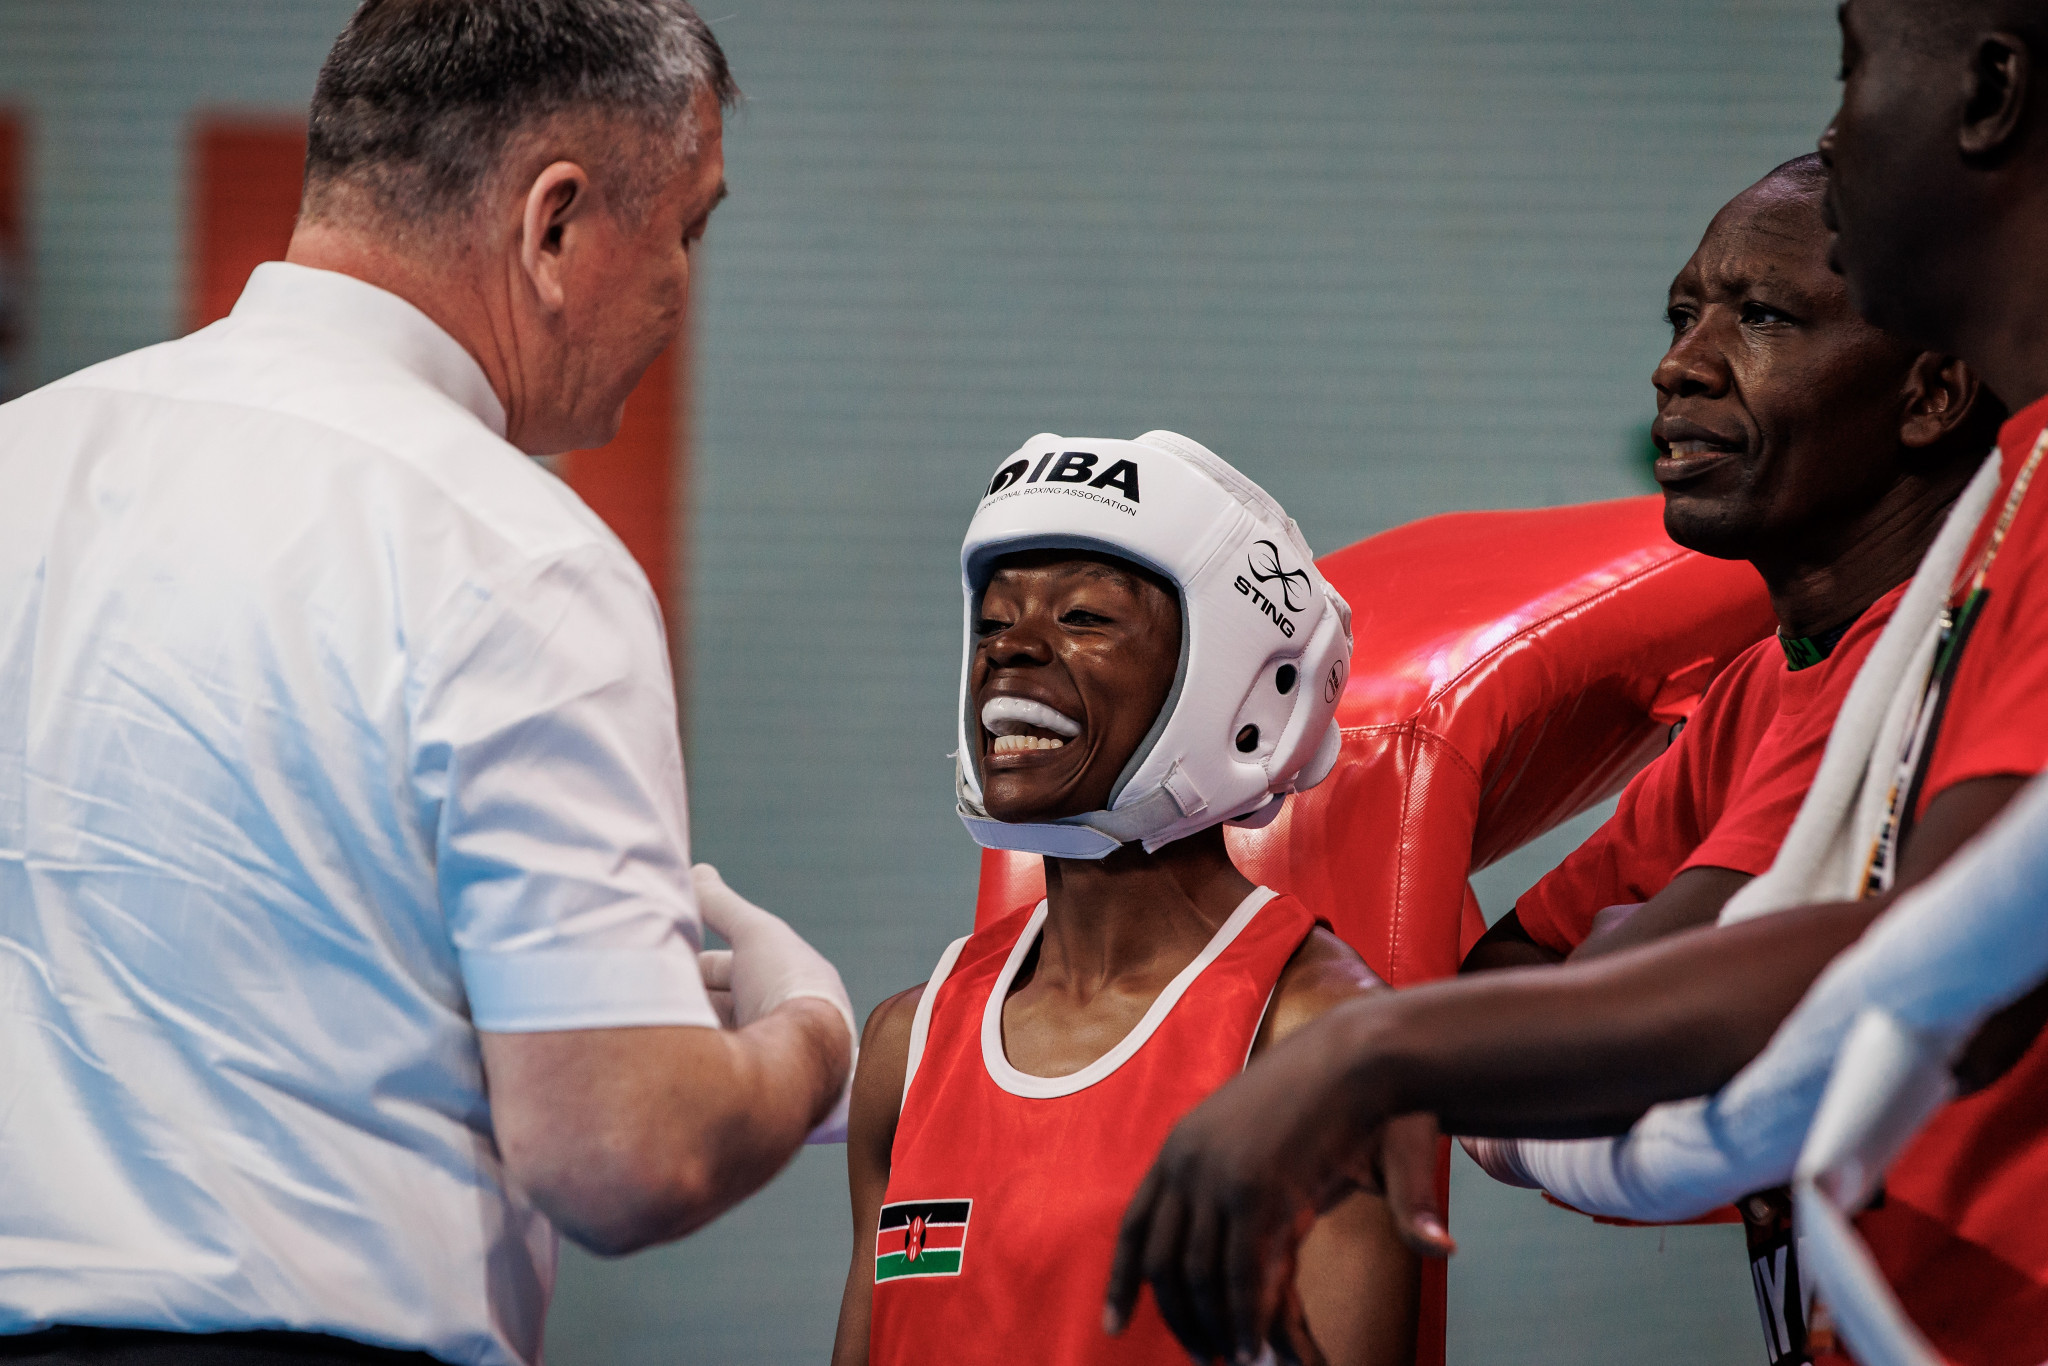 A Kenyan boxer can see the funny side on an action-packed day of boxing in New Delhi ©IBA